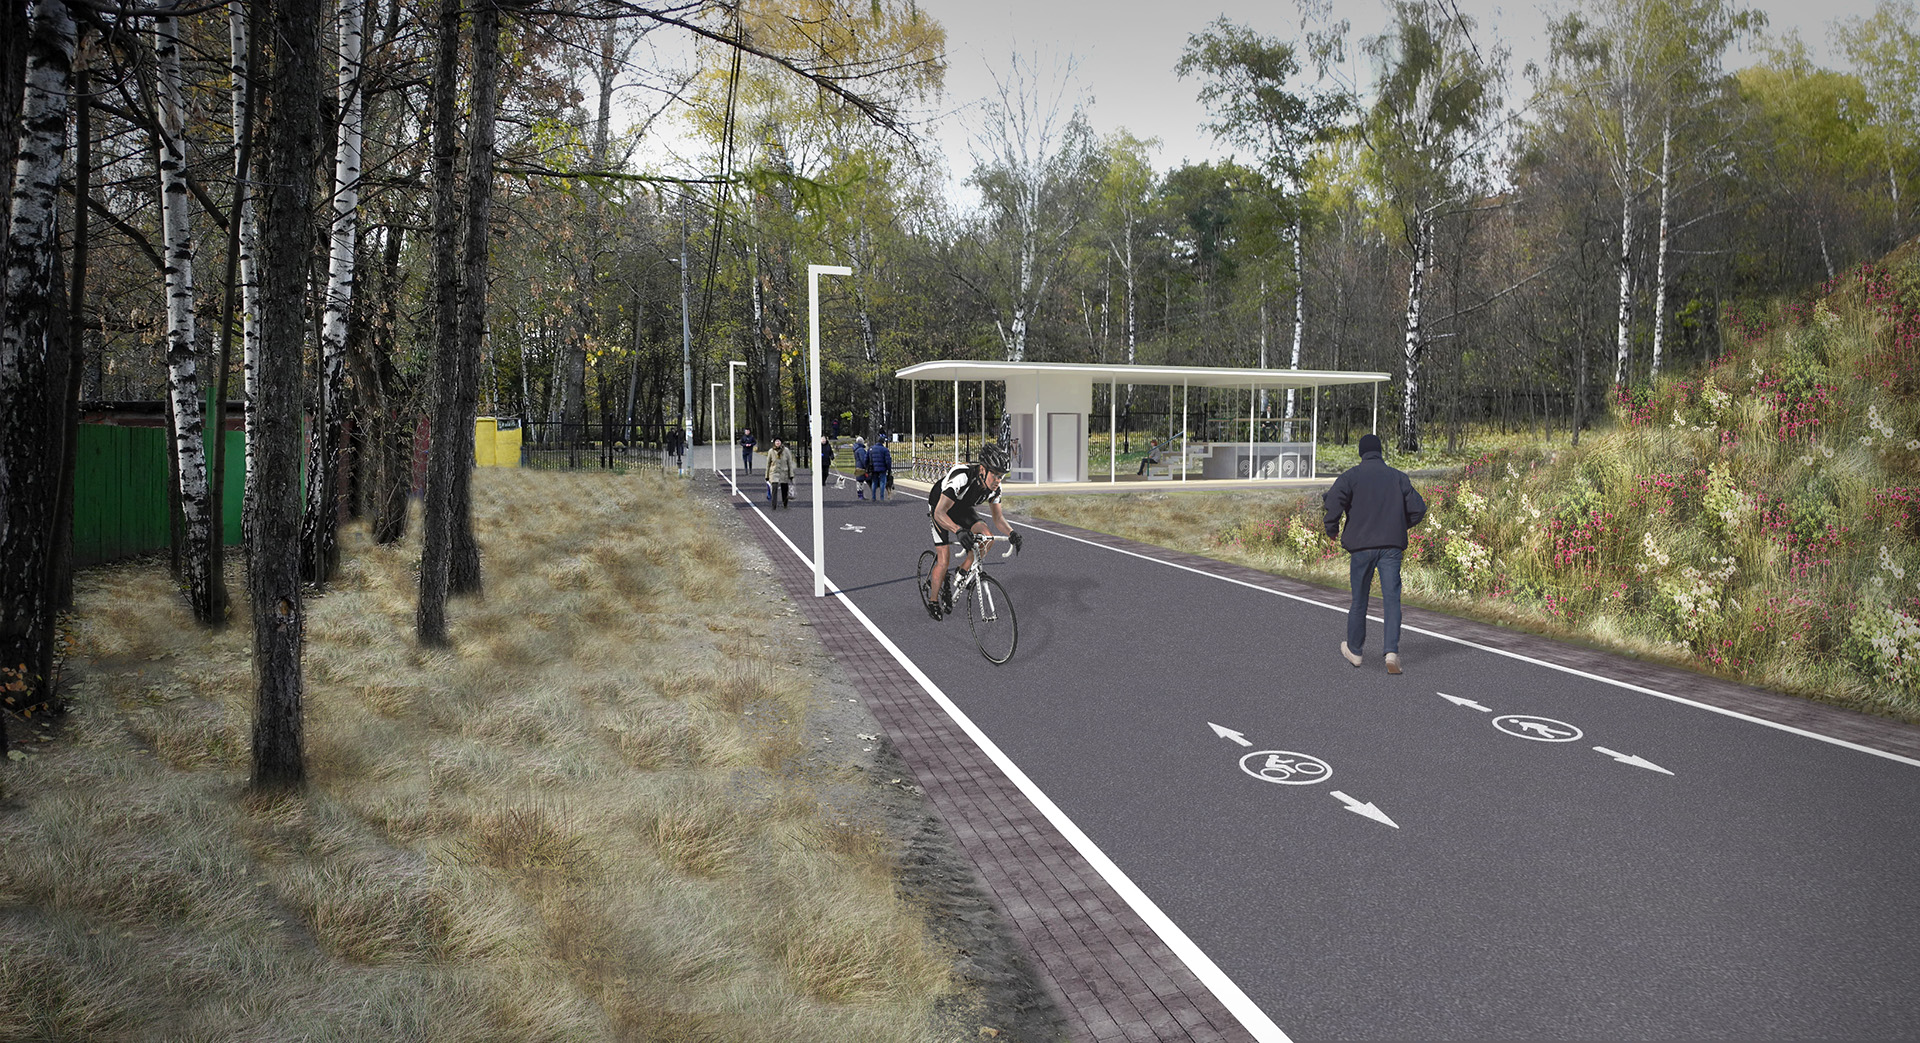 View of the cycle route and bicycle pavilion in Pokrovskoye – Streshnevo park